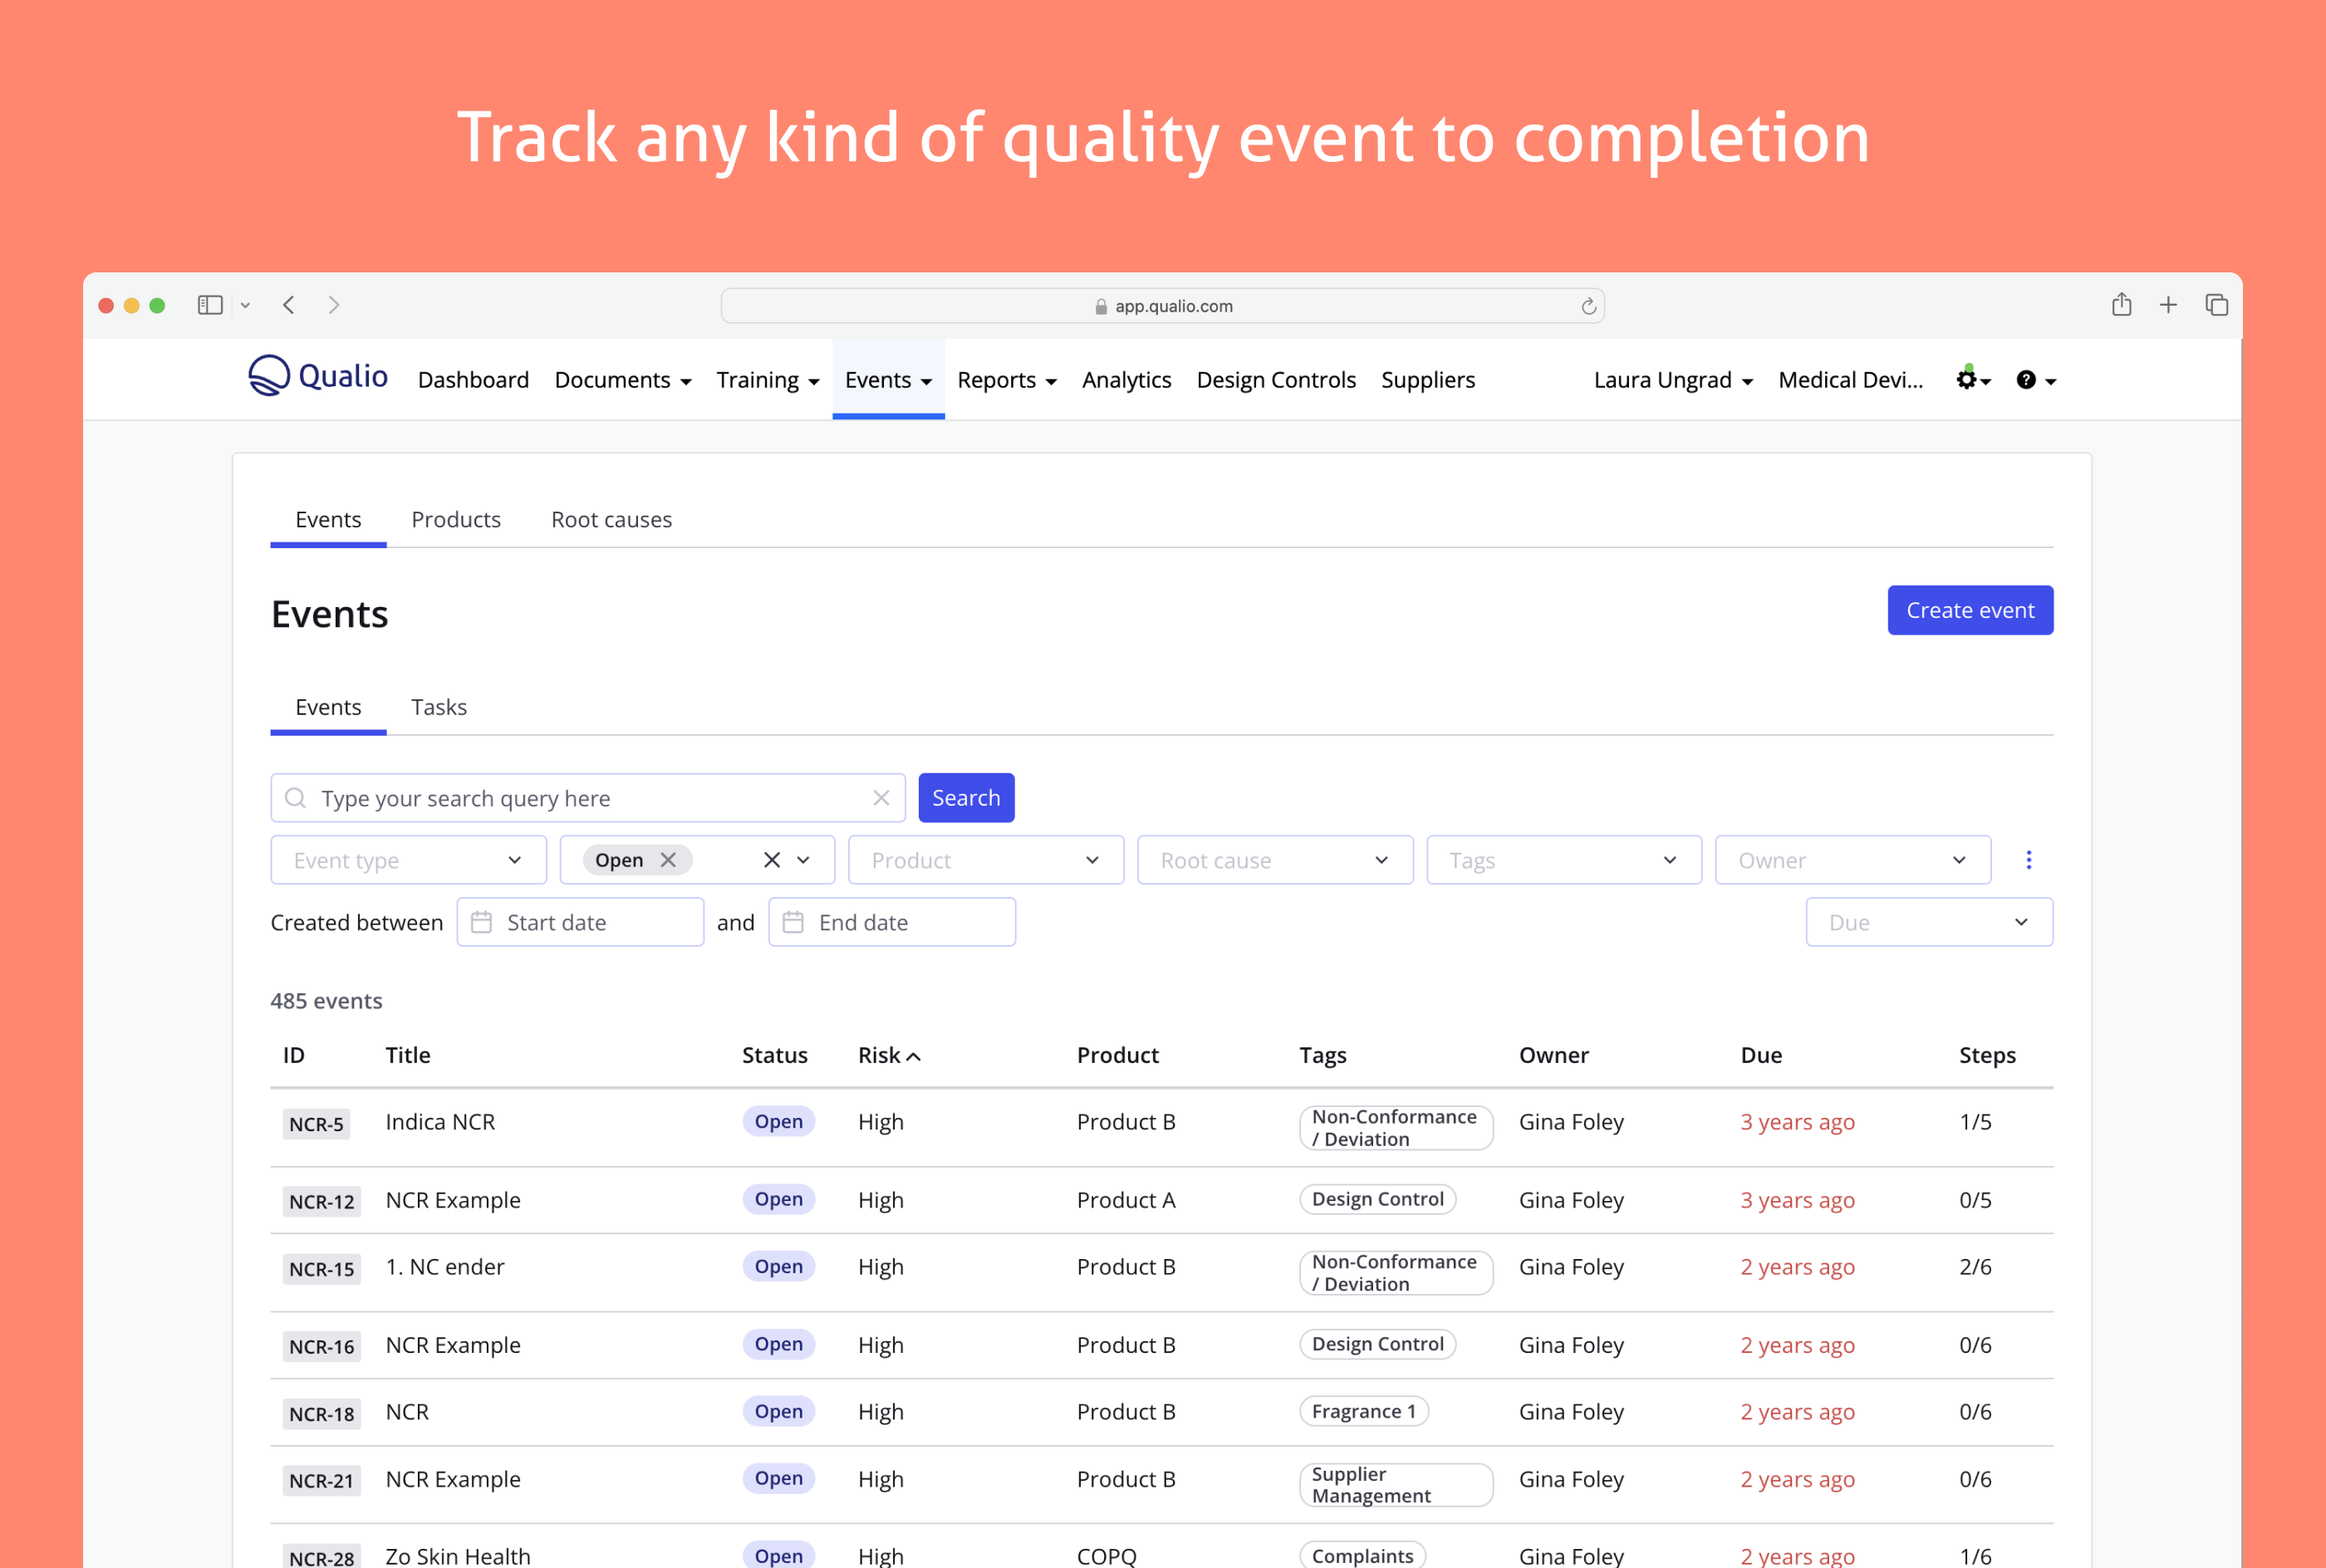 Track any kind of quality event to completion